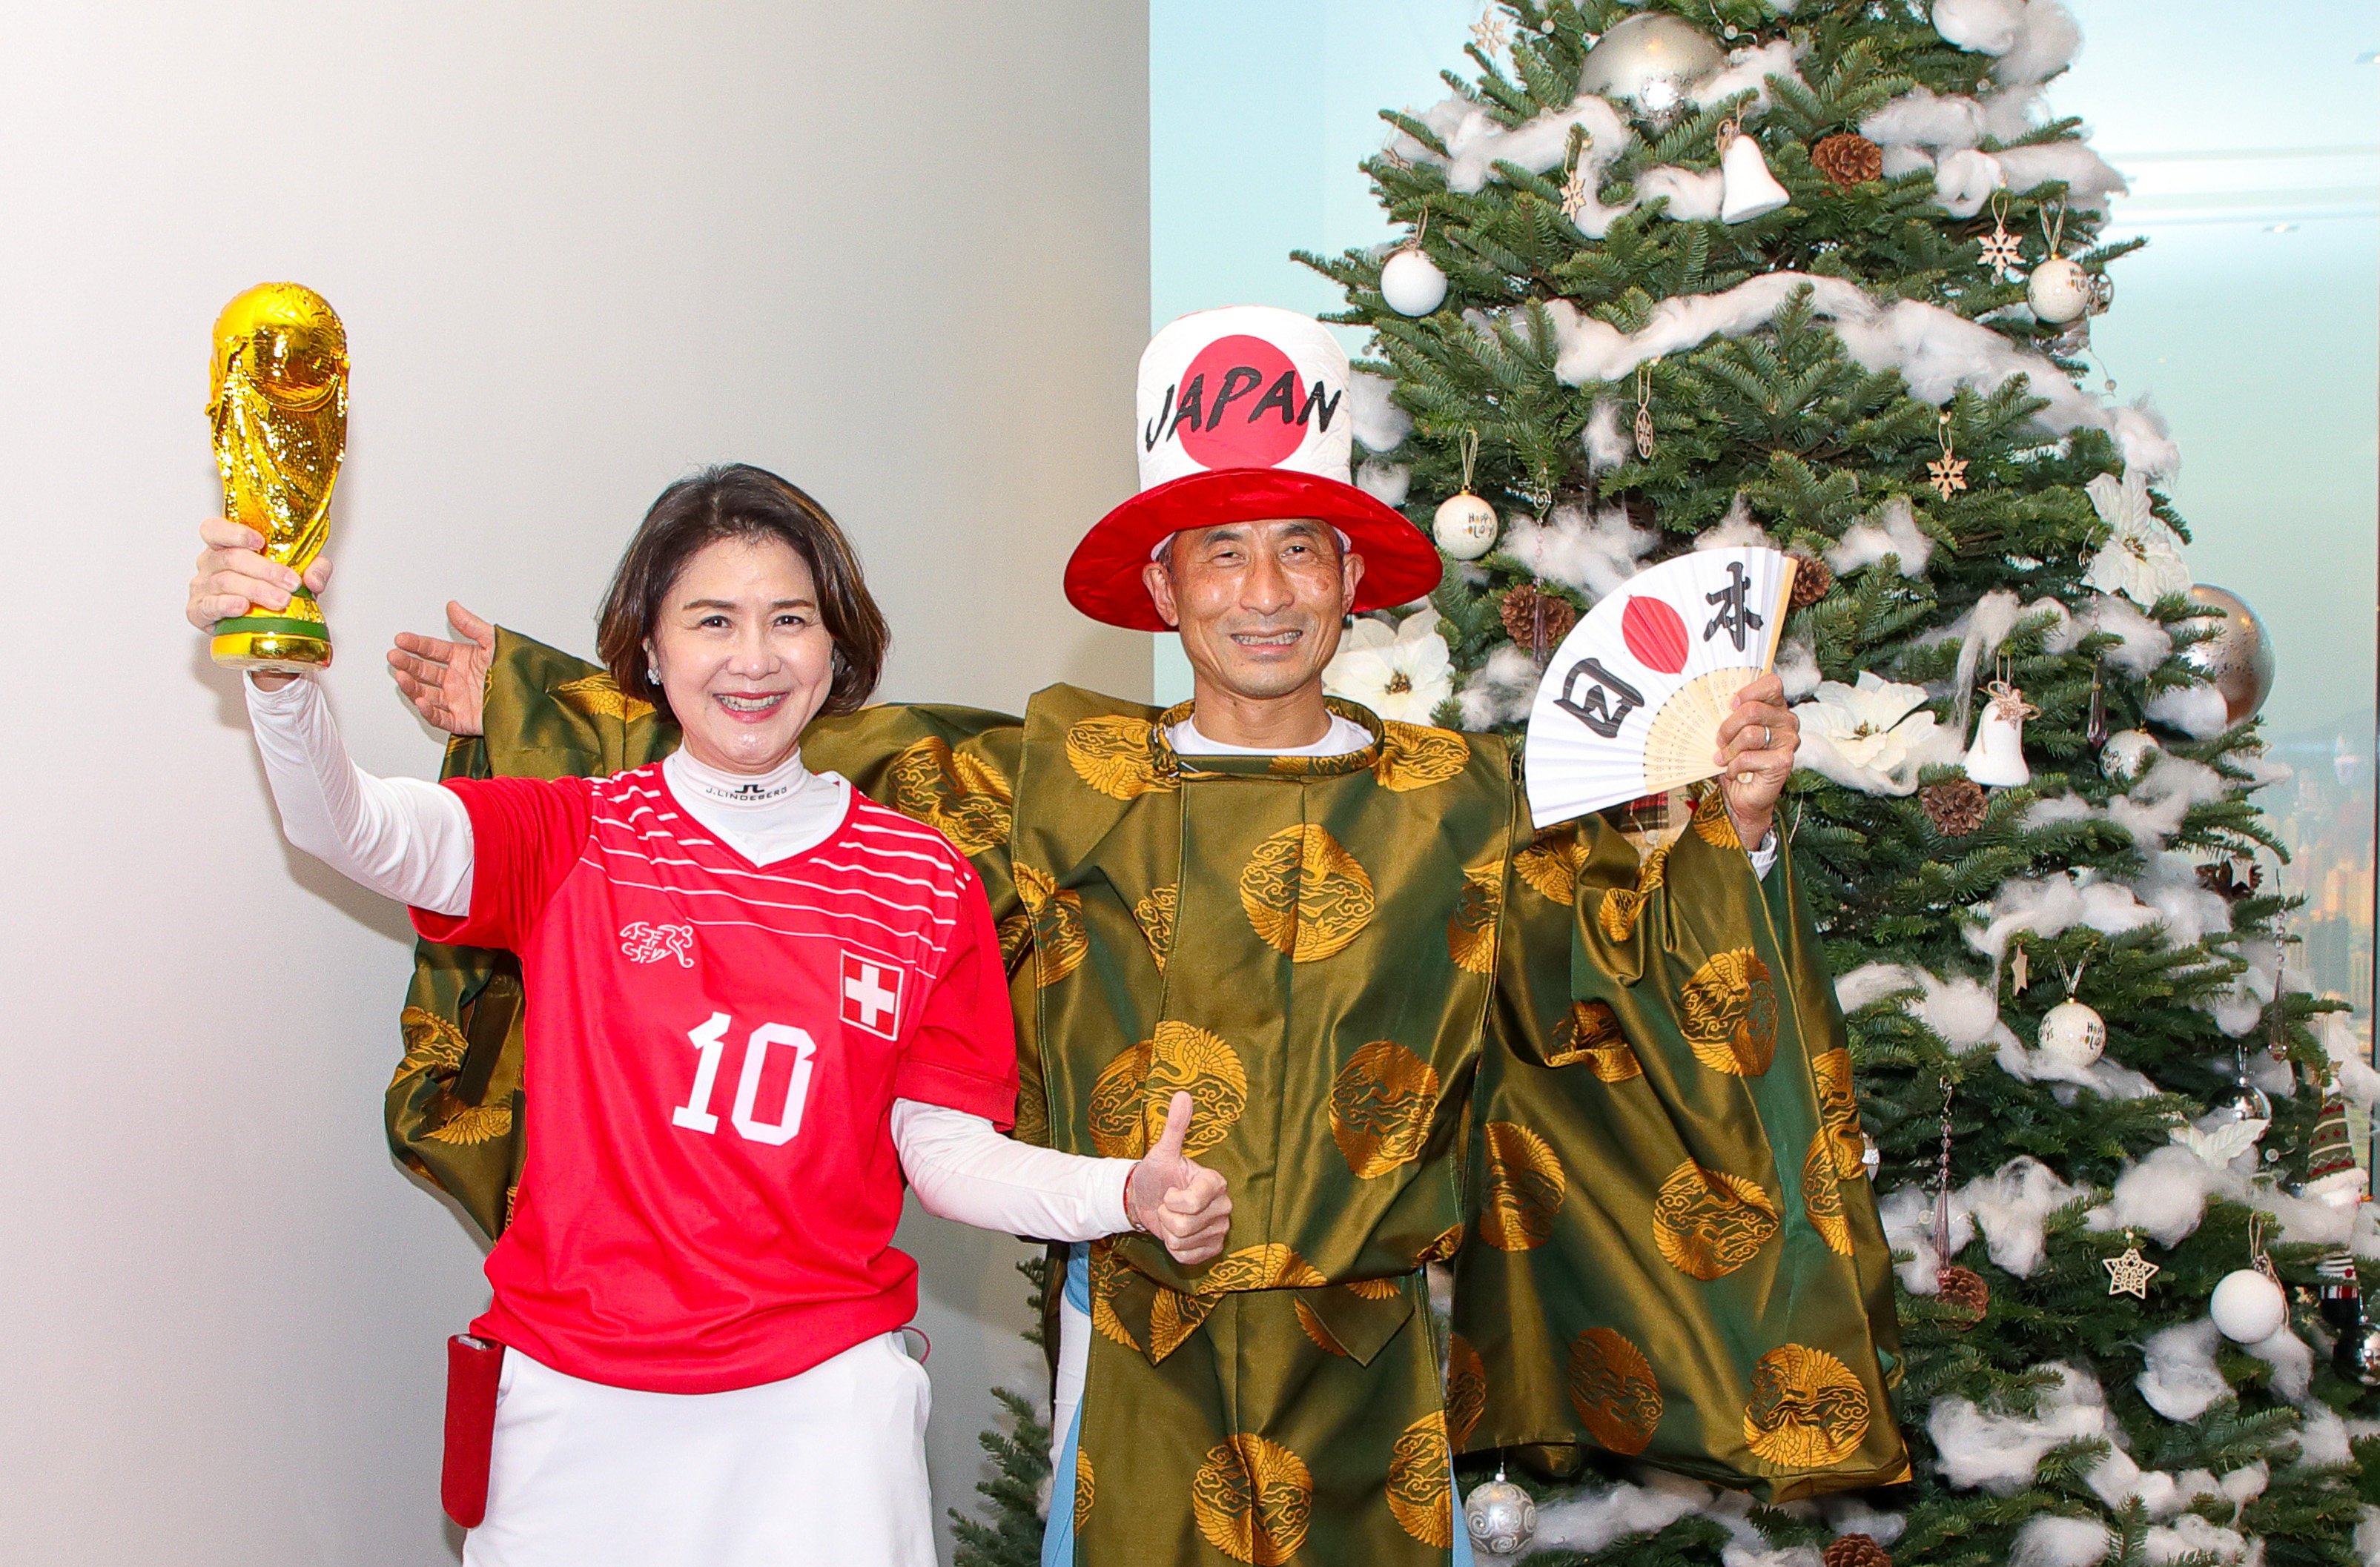 Amy Lo, chief executive of UBS Hong Kong, and Taichi Takahashi, head of investment bank for Asia Pacific, dress in their World Cup best during a fundraising event in support of Operation Santa Claus. Photo: Bharat Khemlani